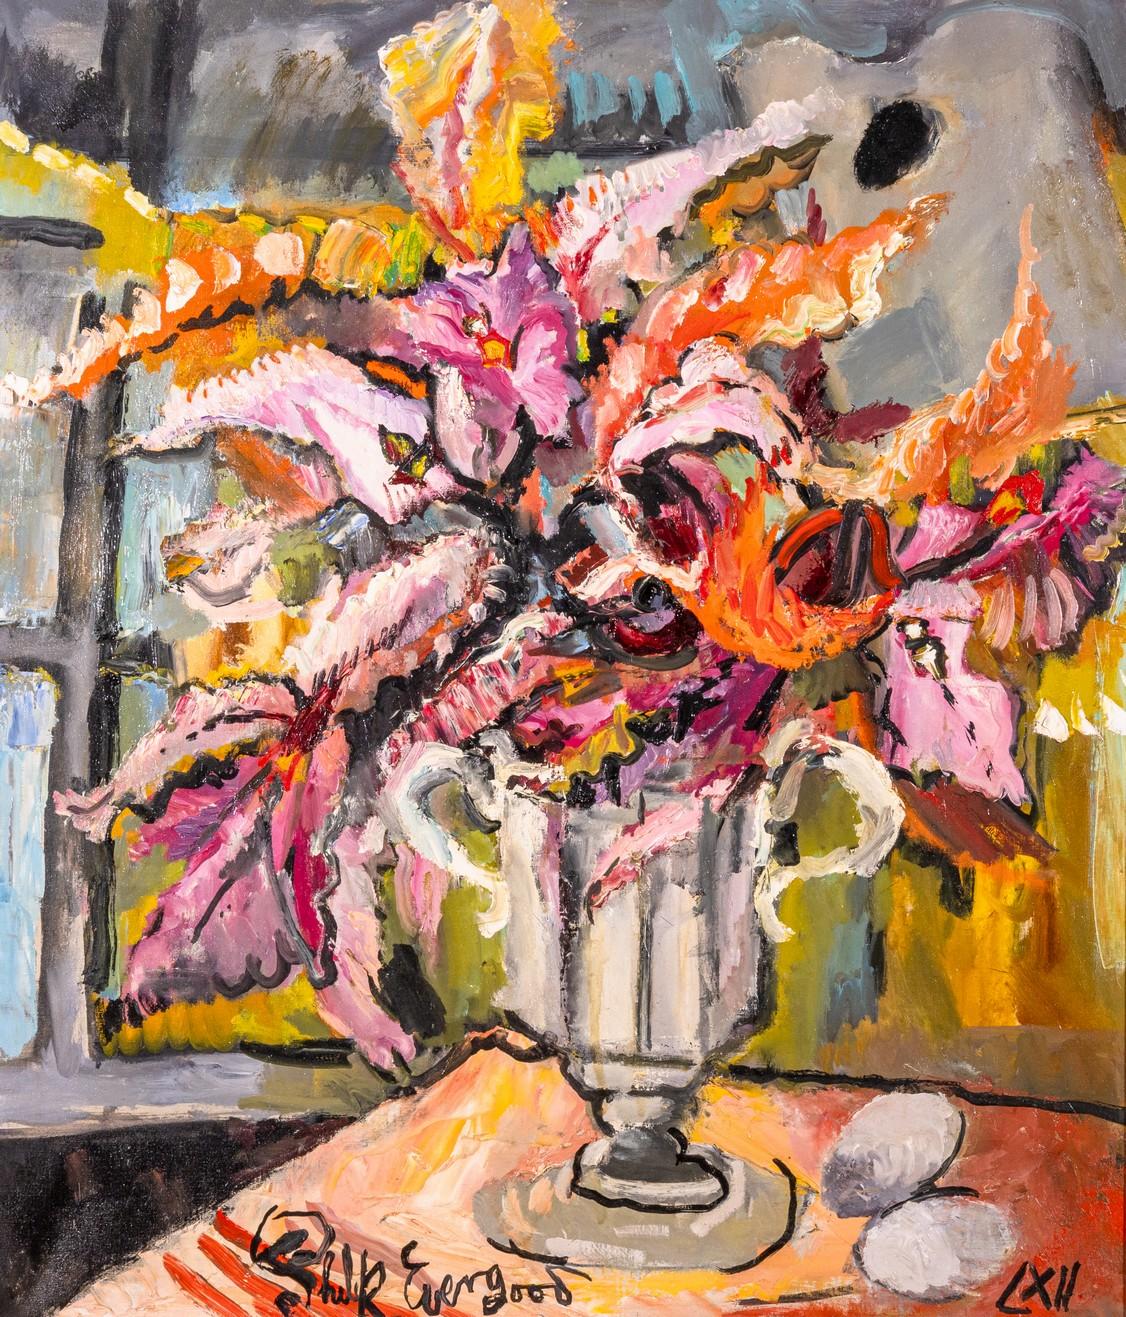 An expressive modern oil painting on canvas titled “Orchids in my Studio” by American Social Realism painter Philip Evergood. Signed mid left bottom by the artist with the roman numeral “LXII” on the bottom right, possibly referring to the date